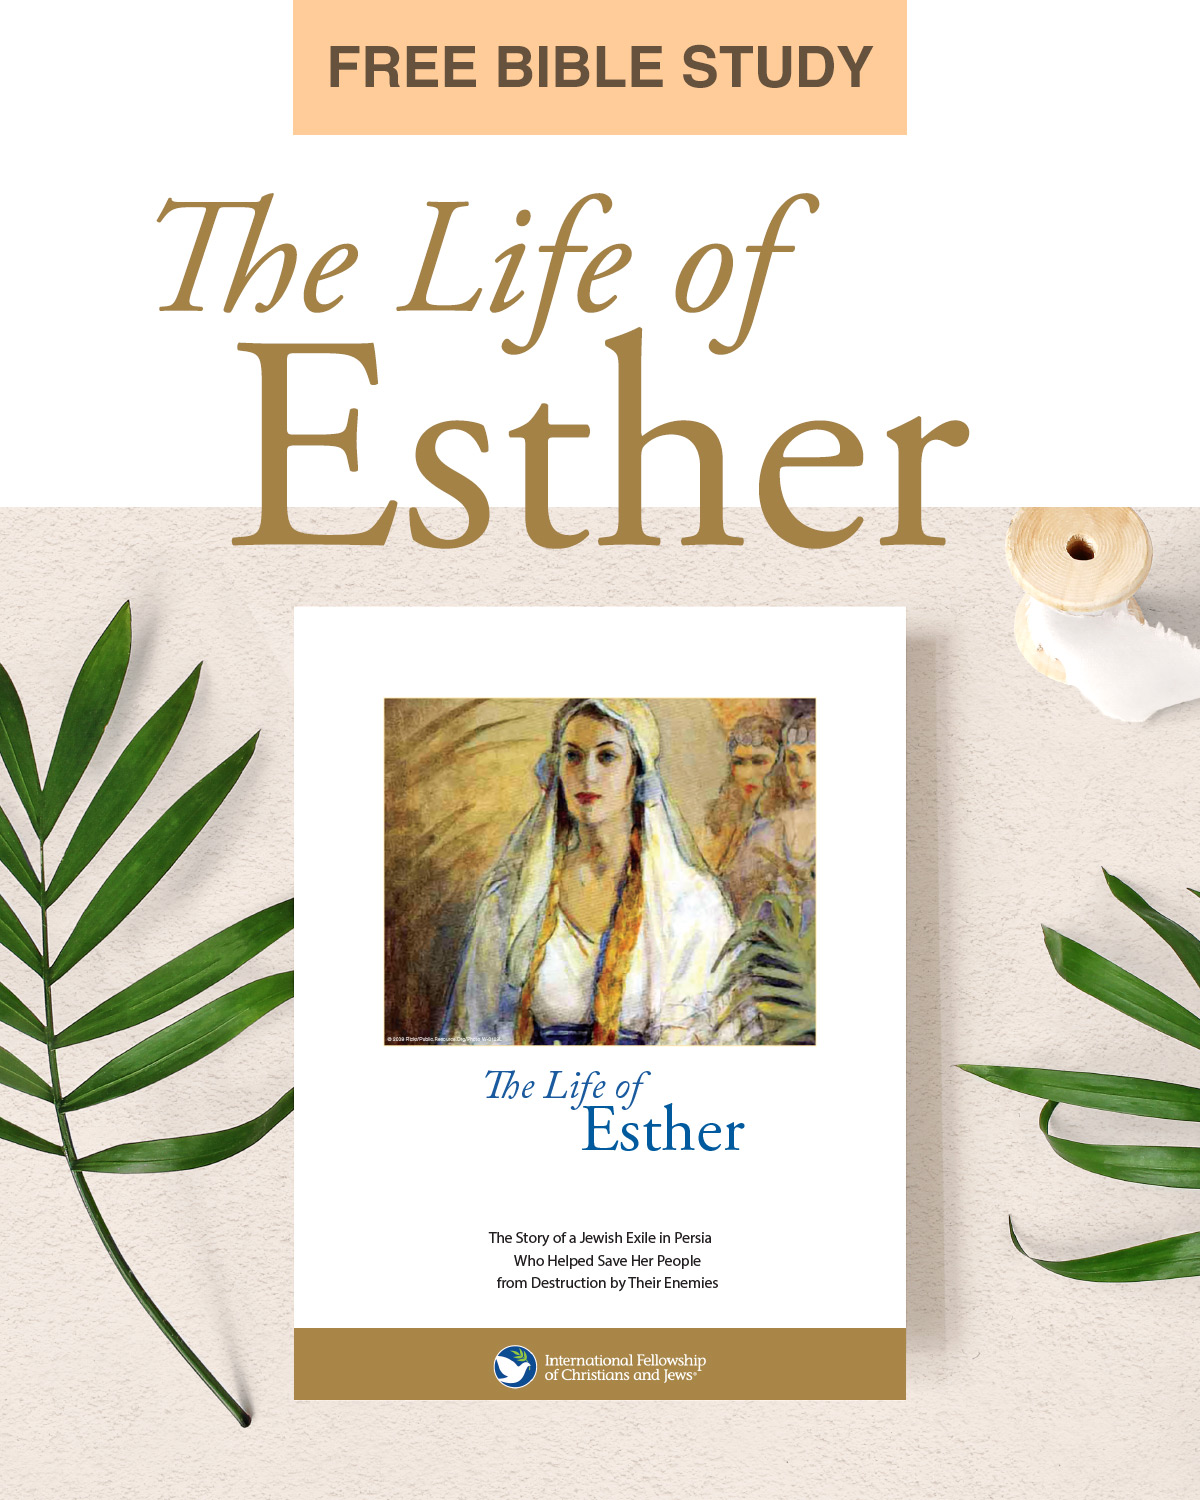 Free Bible Study: The Life of Esther